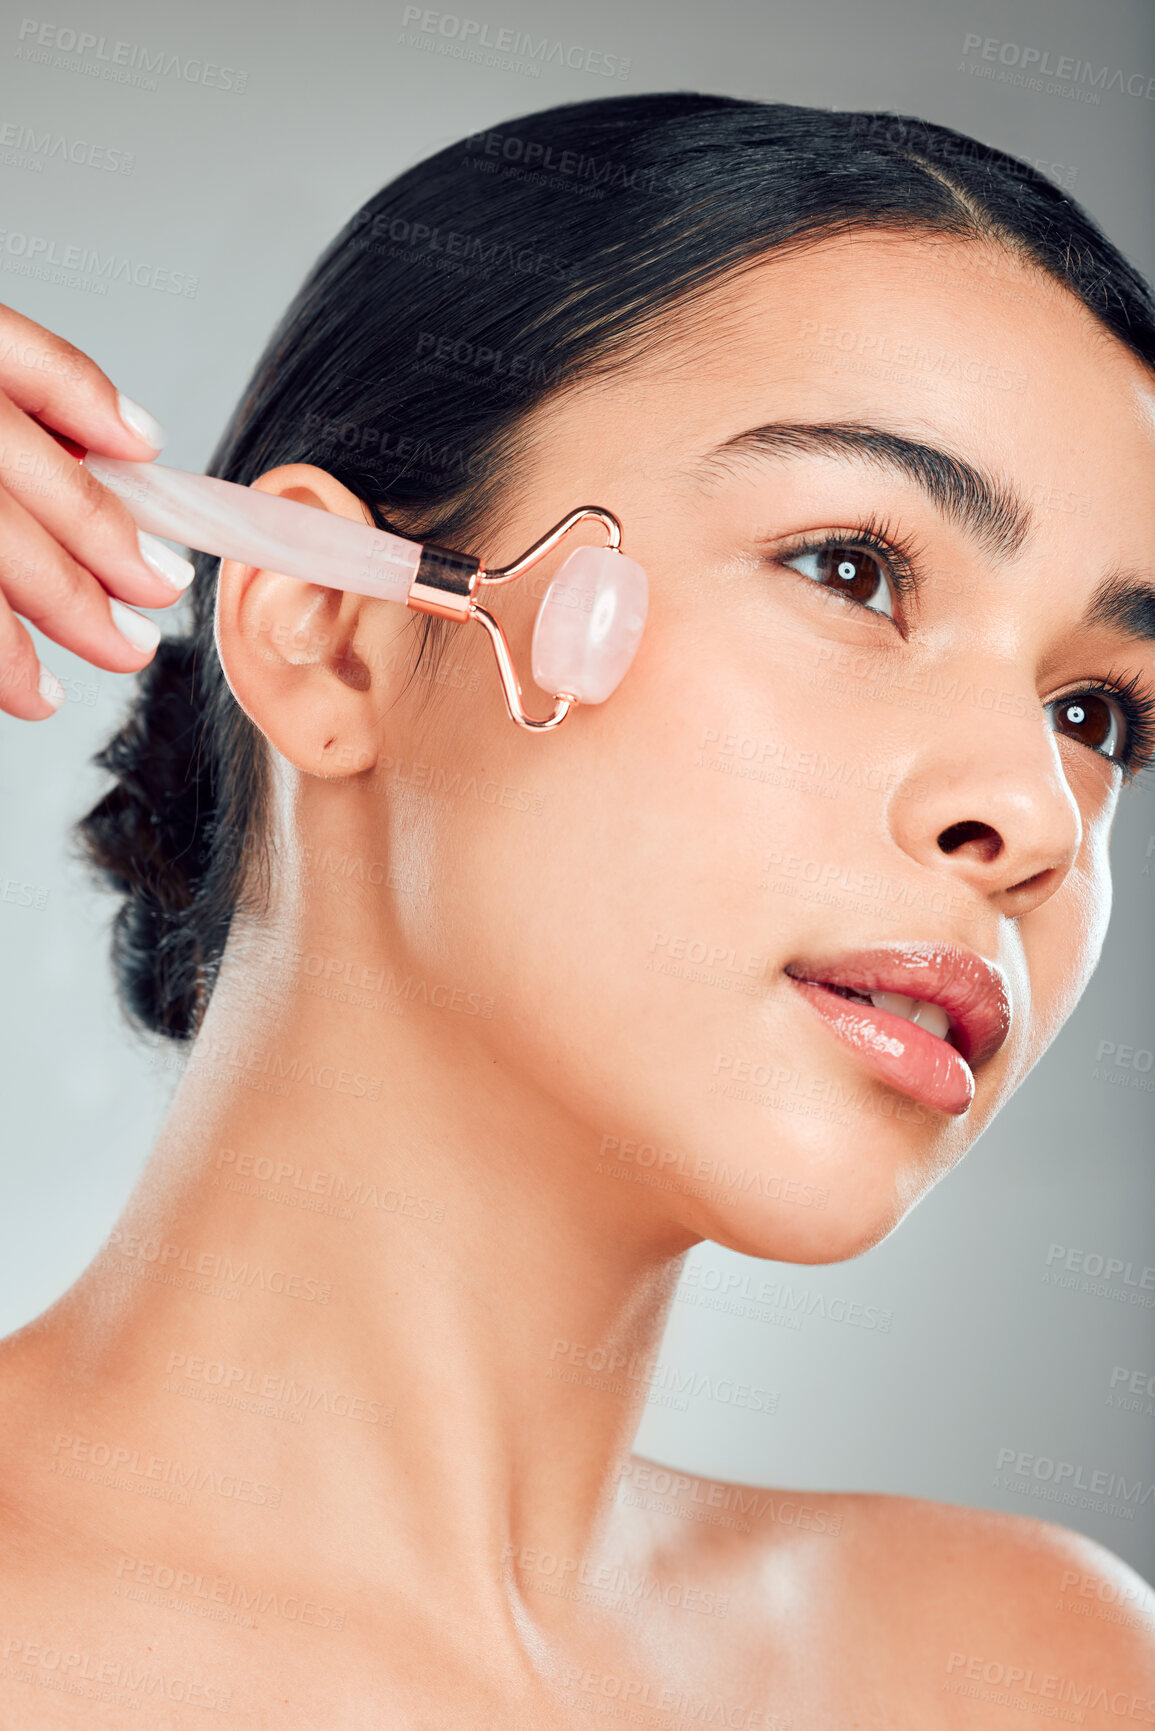 Buy stock photo One beautiful mixed race woman using a rose quartz derma roller during a selfcare grooming routine. Young hispanic woman using anti ageing tool against grey copyspace background